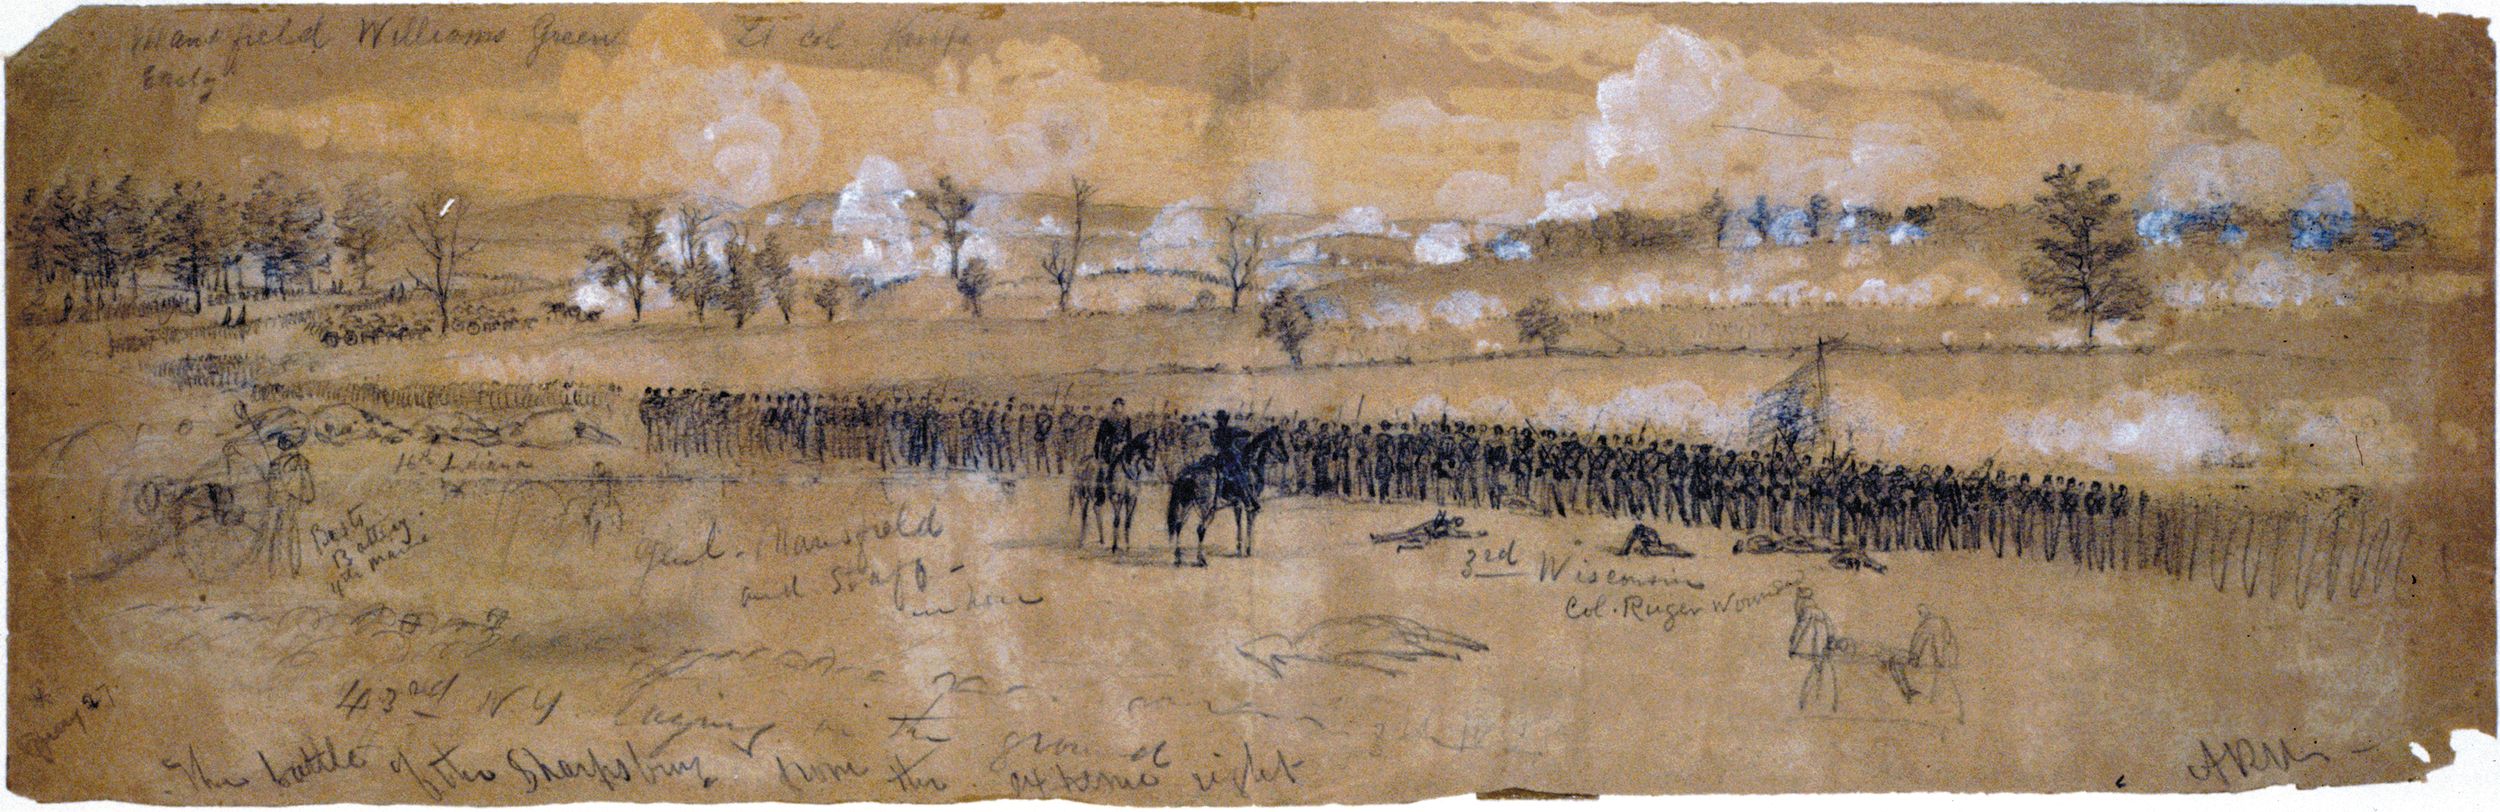 Union troops under Maj. Gen. Joseph Mansfield exchange fire with Confed- erates defending the Cornfield at Antietam in this sketch by  Alfred R. Waud for Harper’s Weekly. By then, Mansfield had already been mortally wounded.